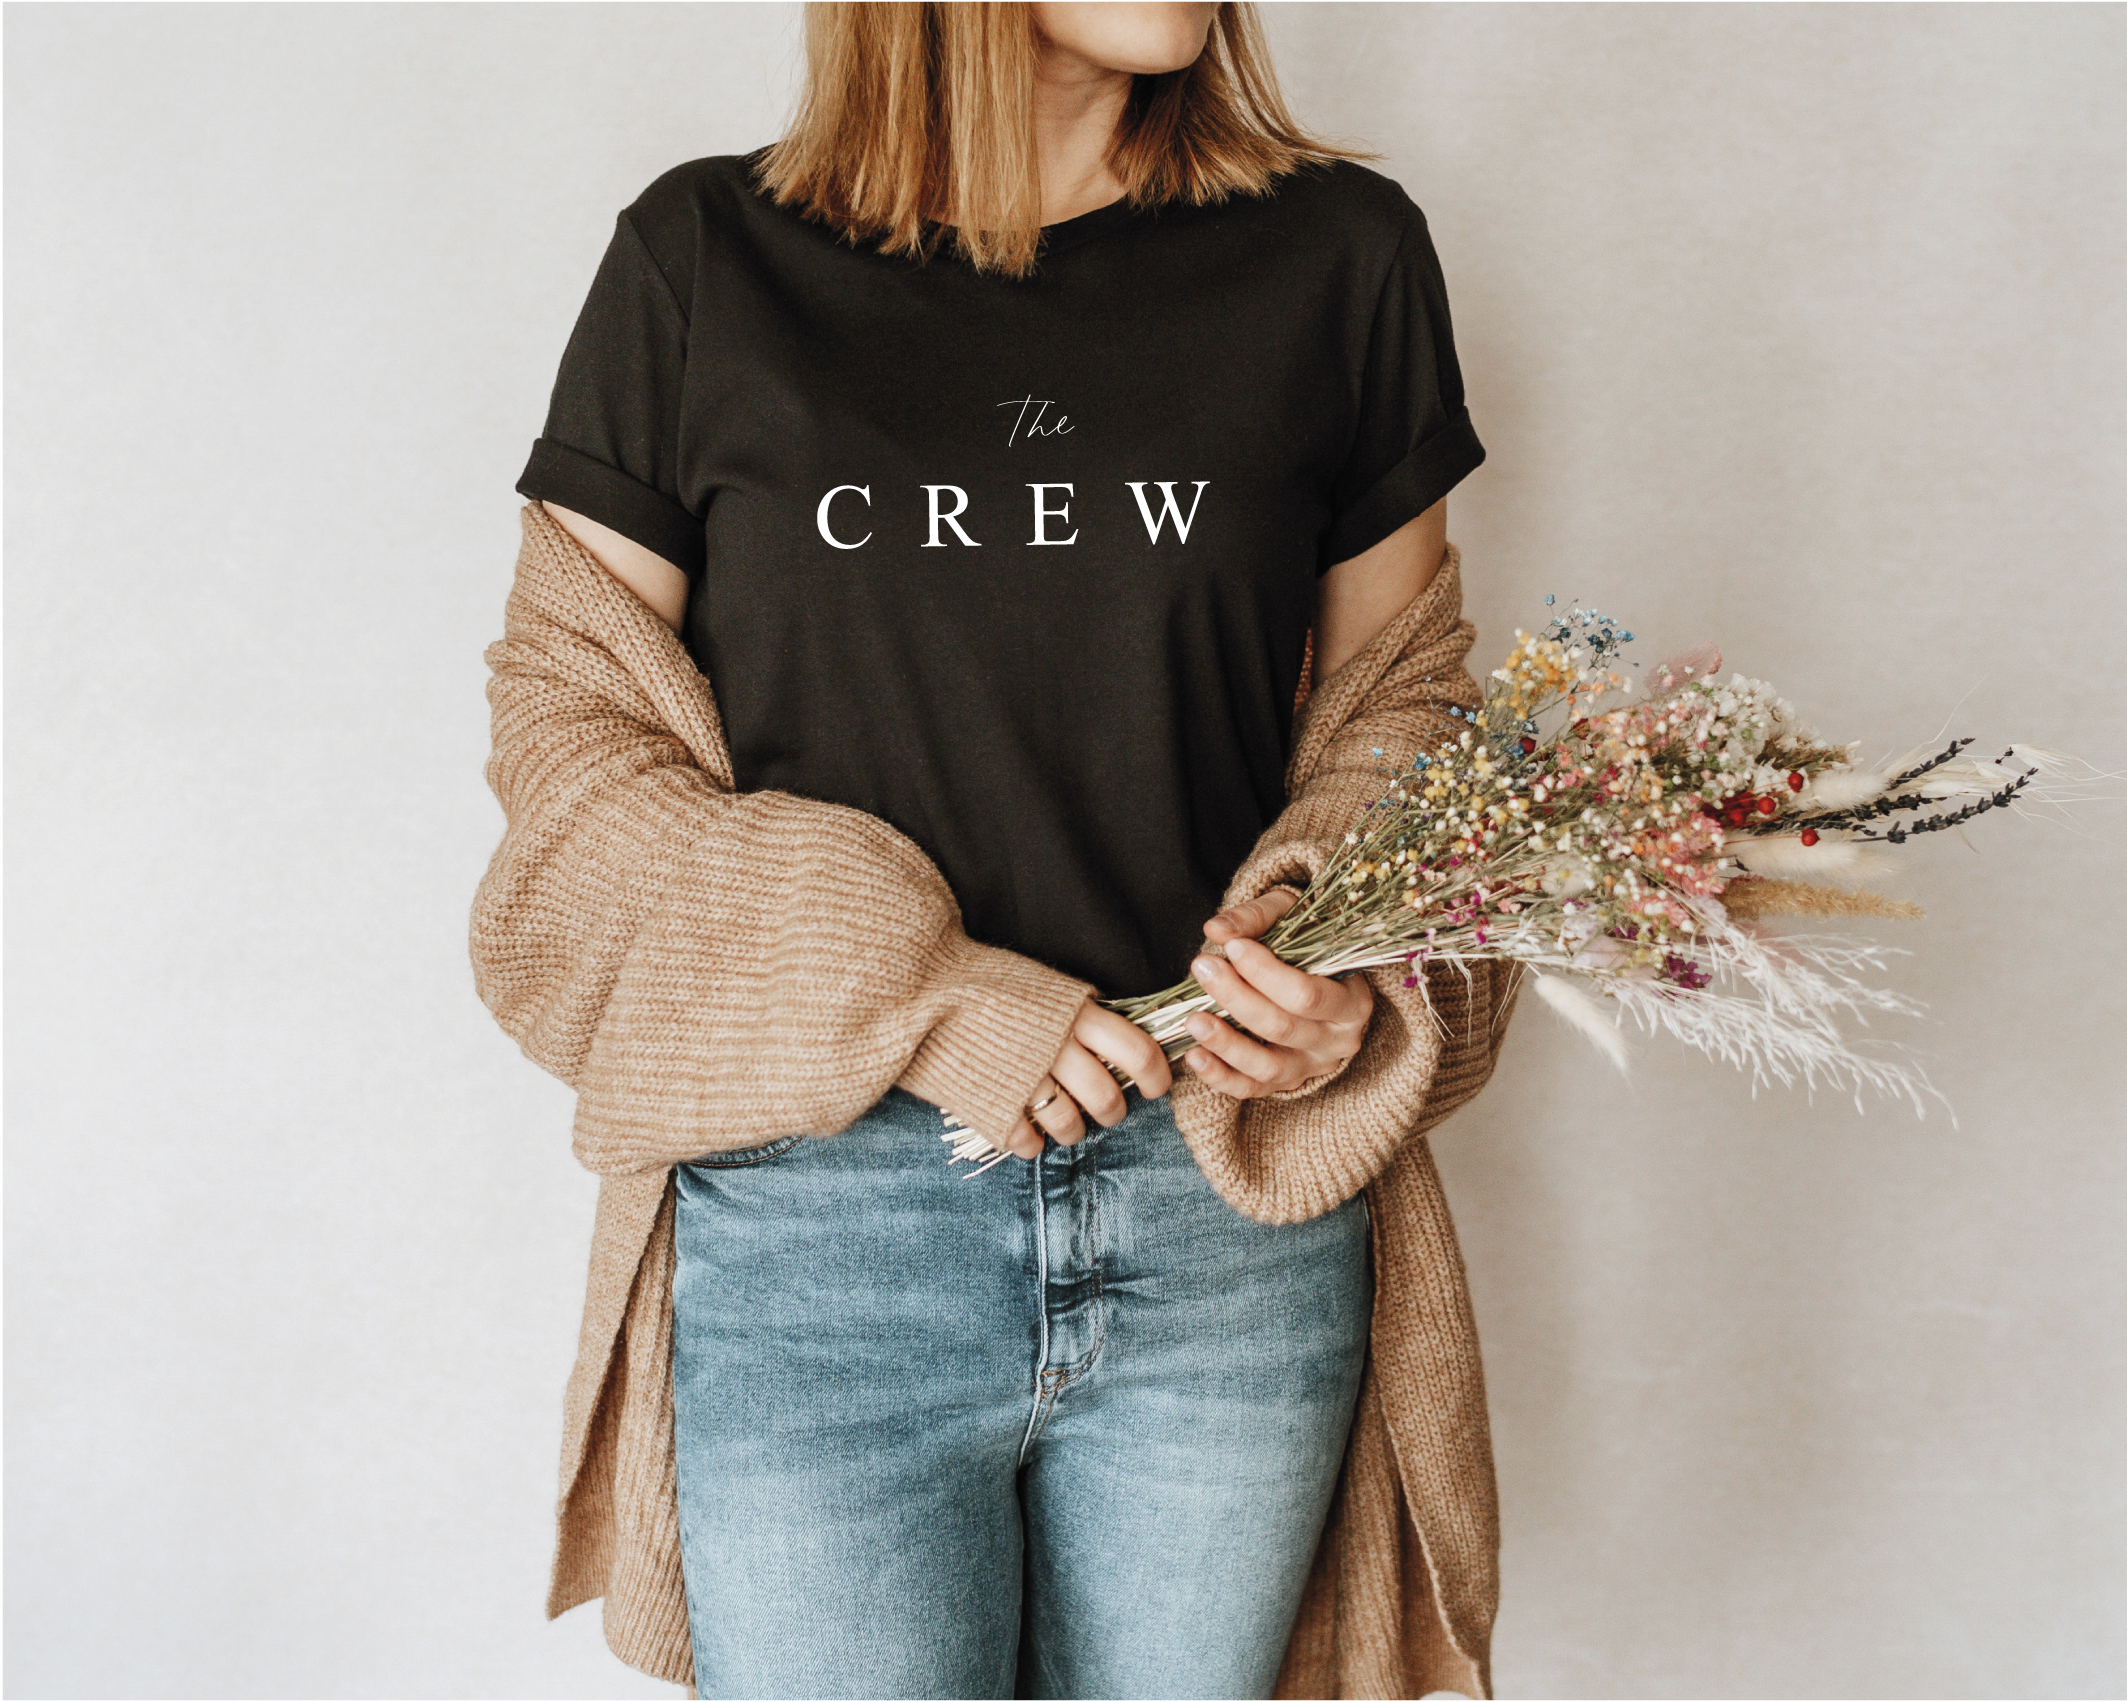 The Bride // The Crew - T-Shirt / Hoody #10